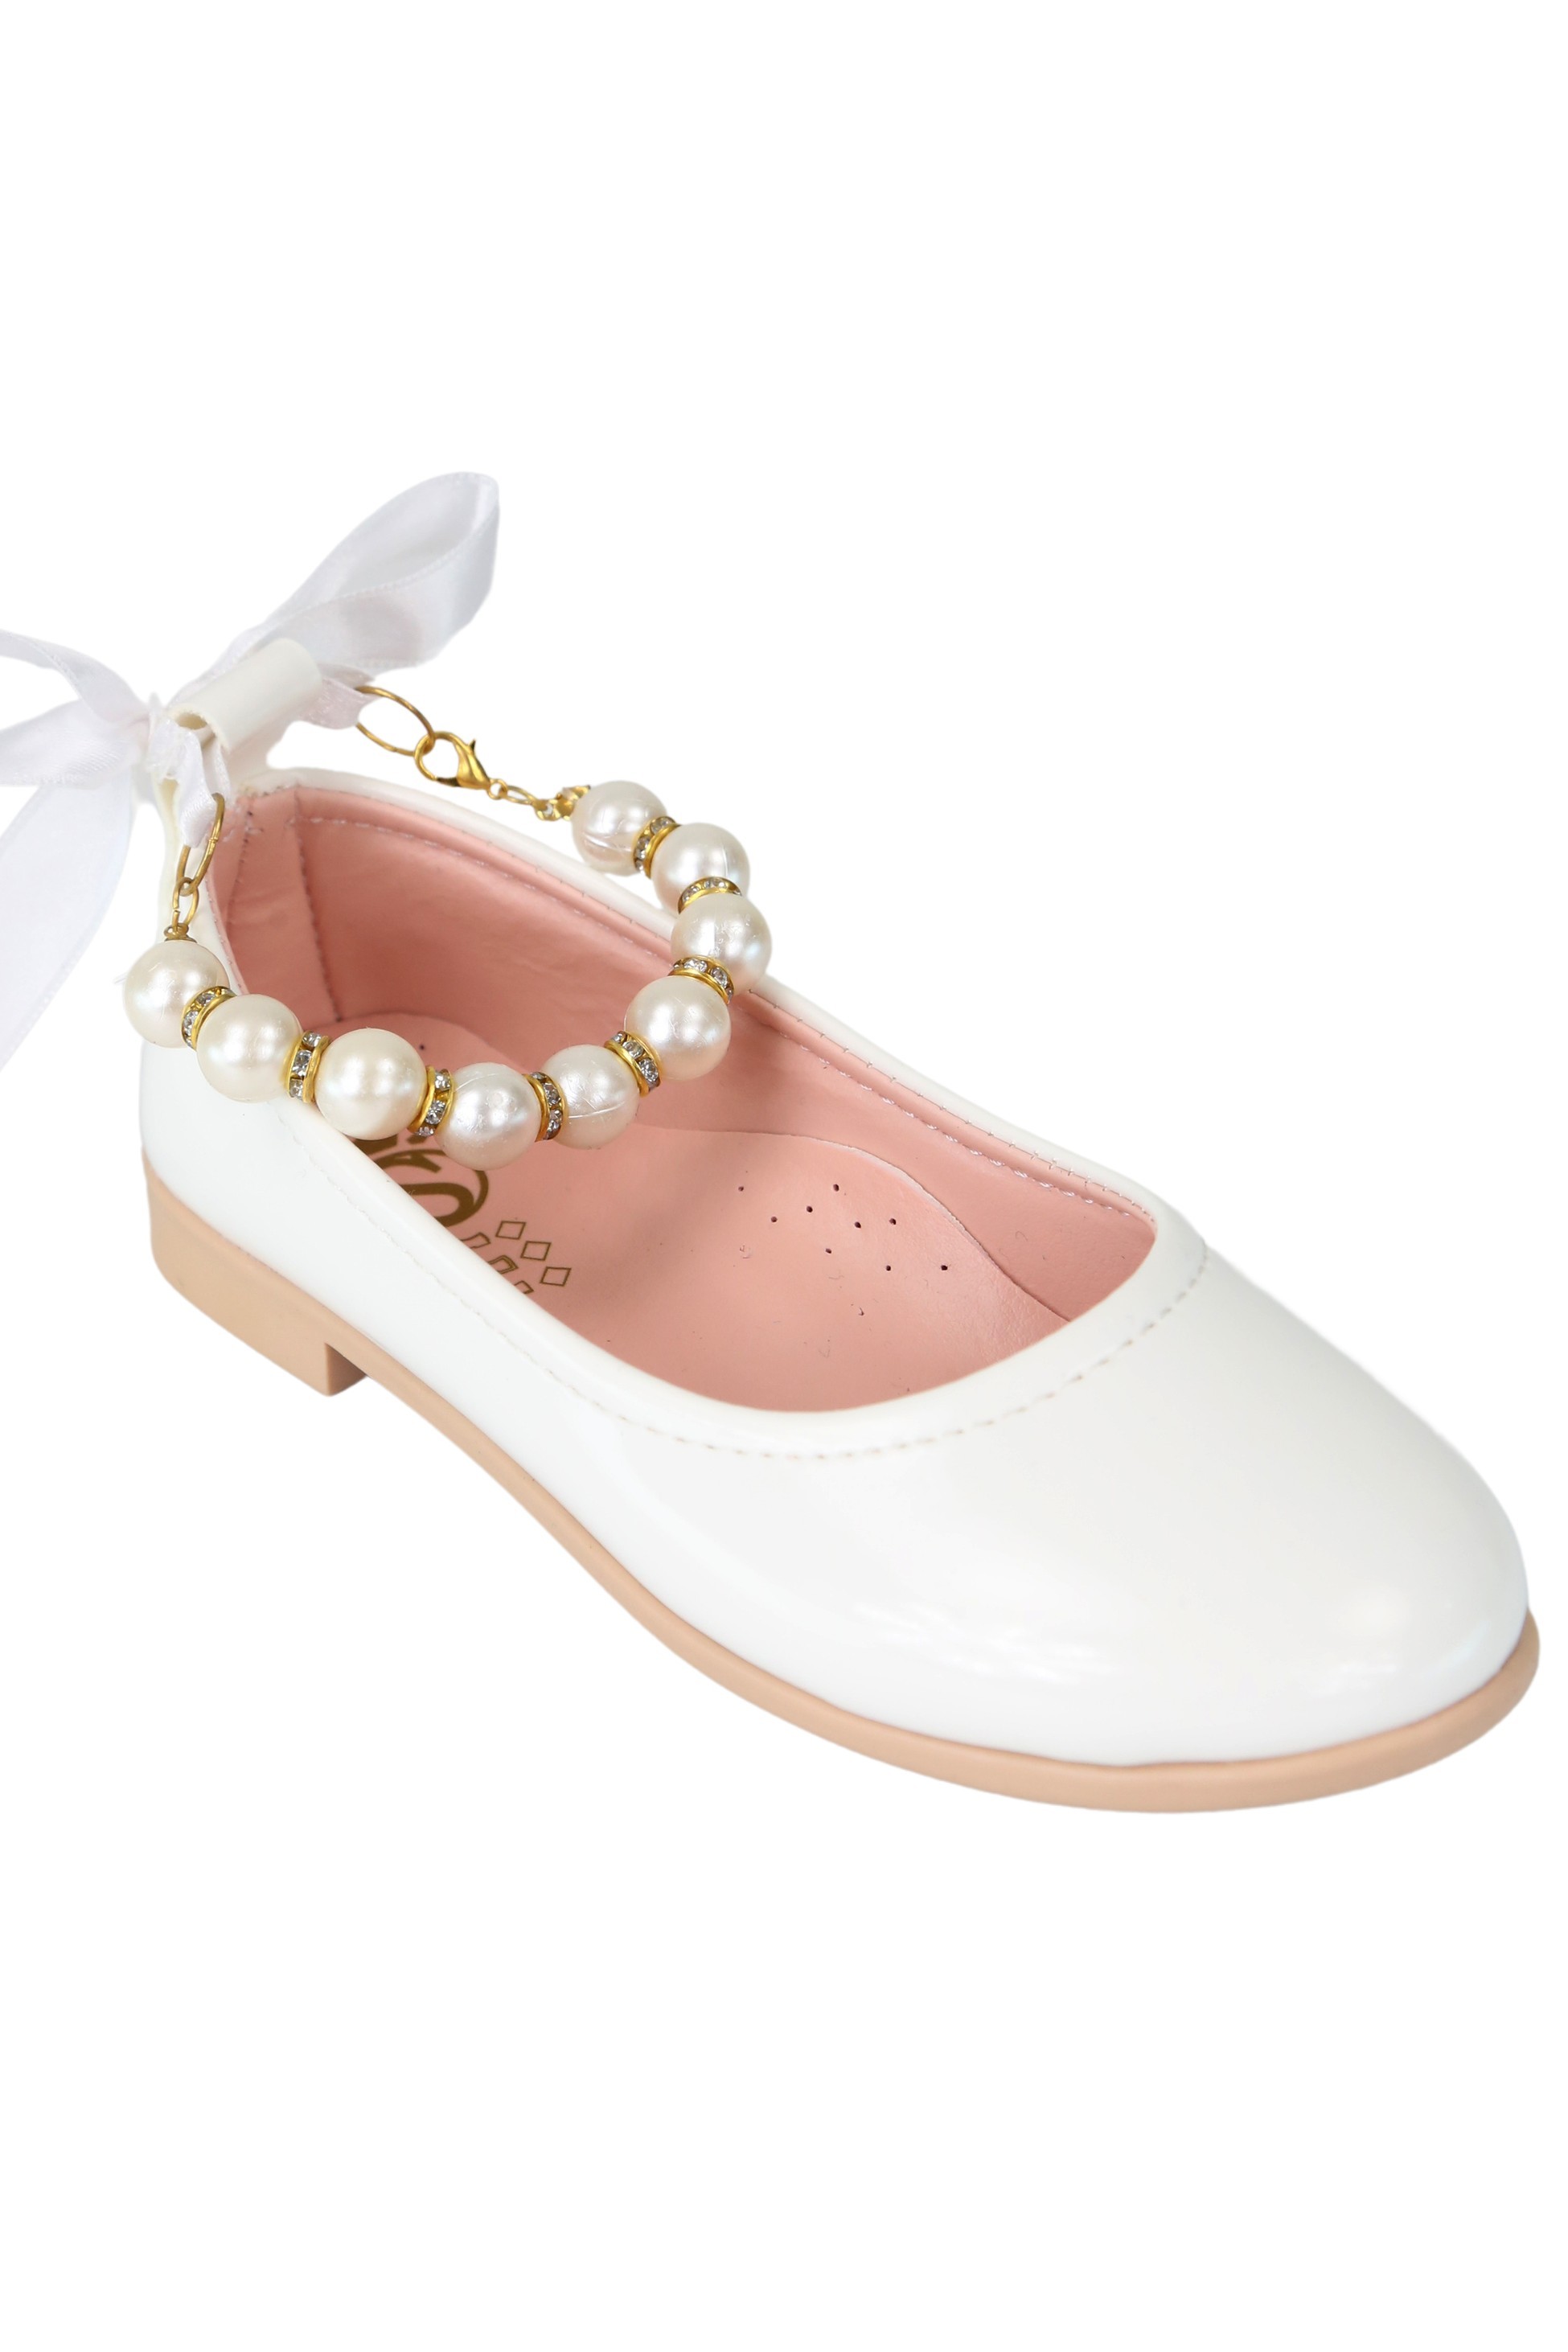 Girls Pearls & Ribbon Slip on Patent Mary Jane Shoes - TEAN